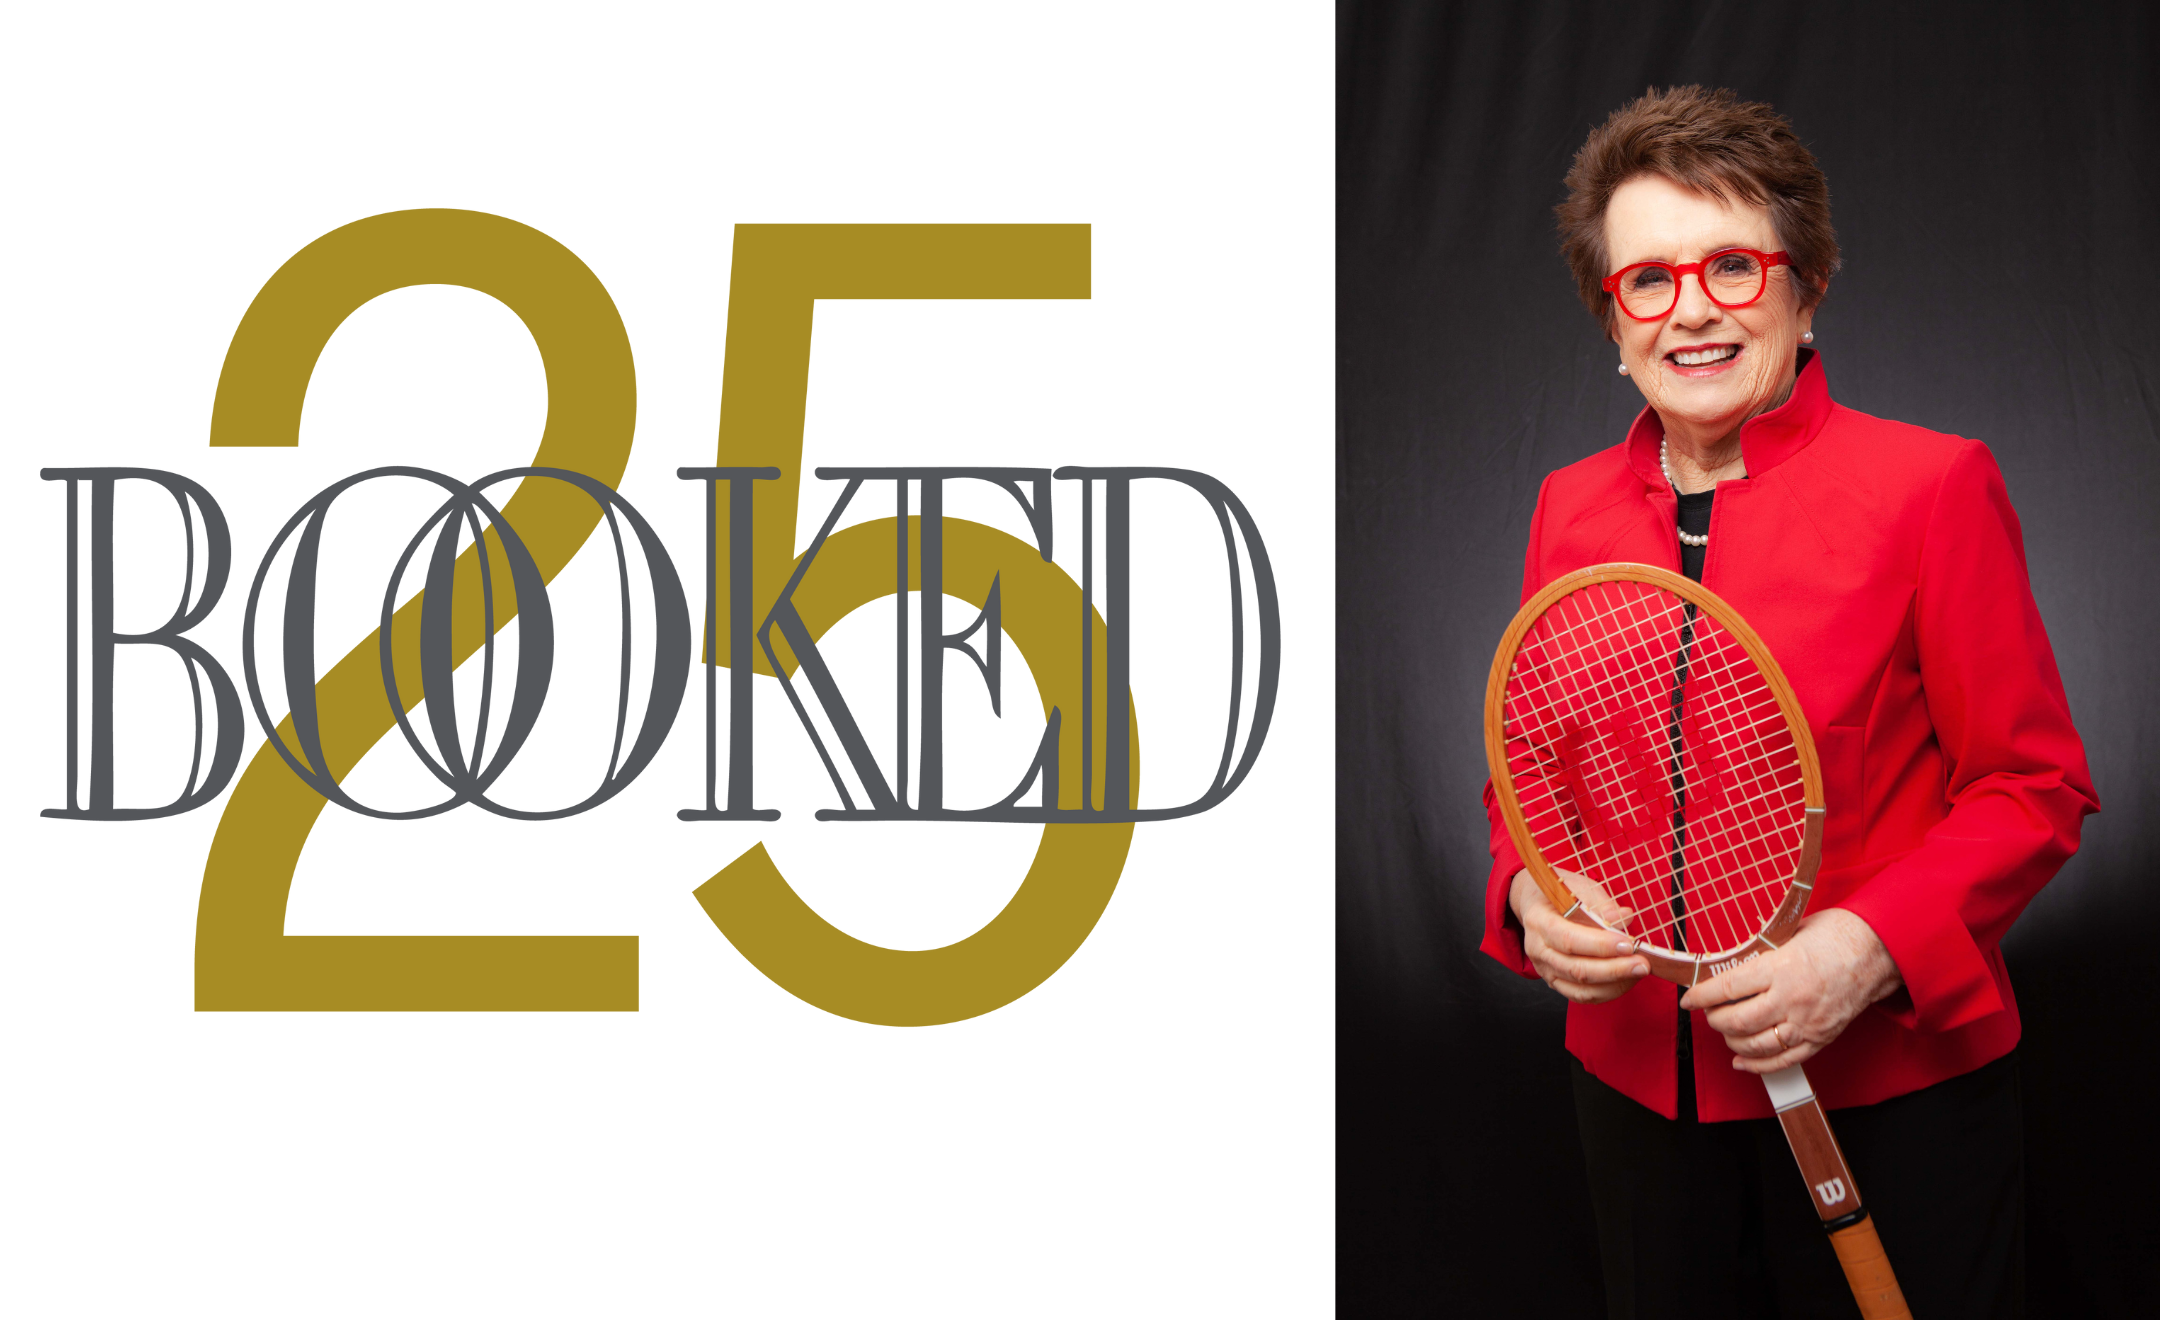 BOOKED for the evening 25th anniversary: Billie Jean King